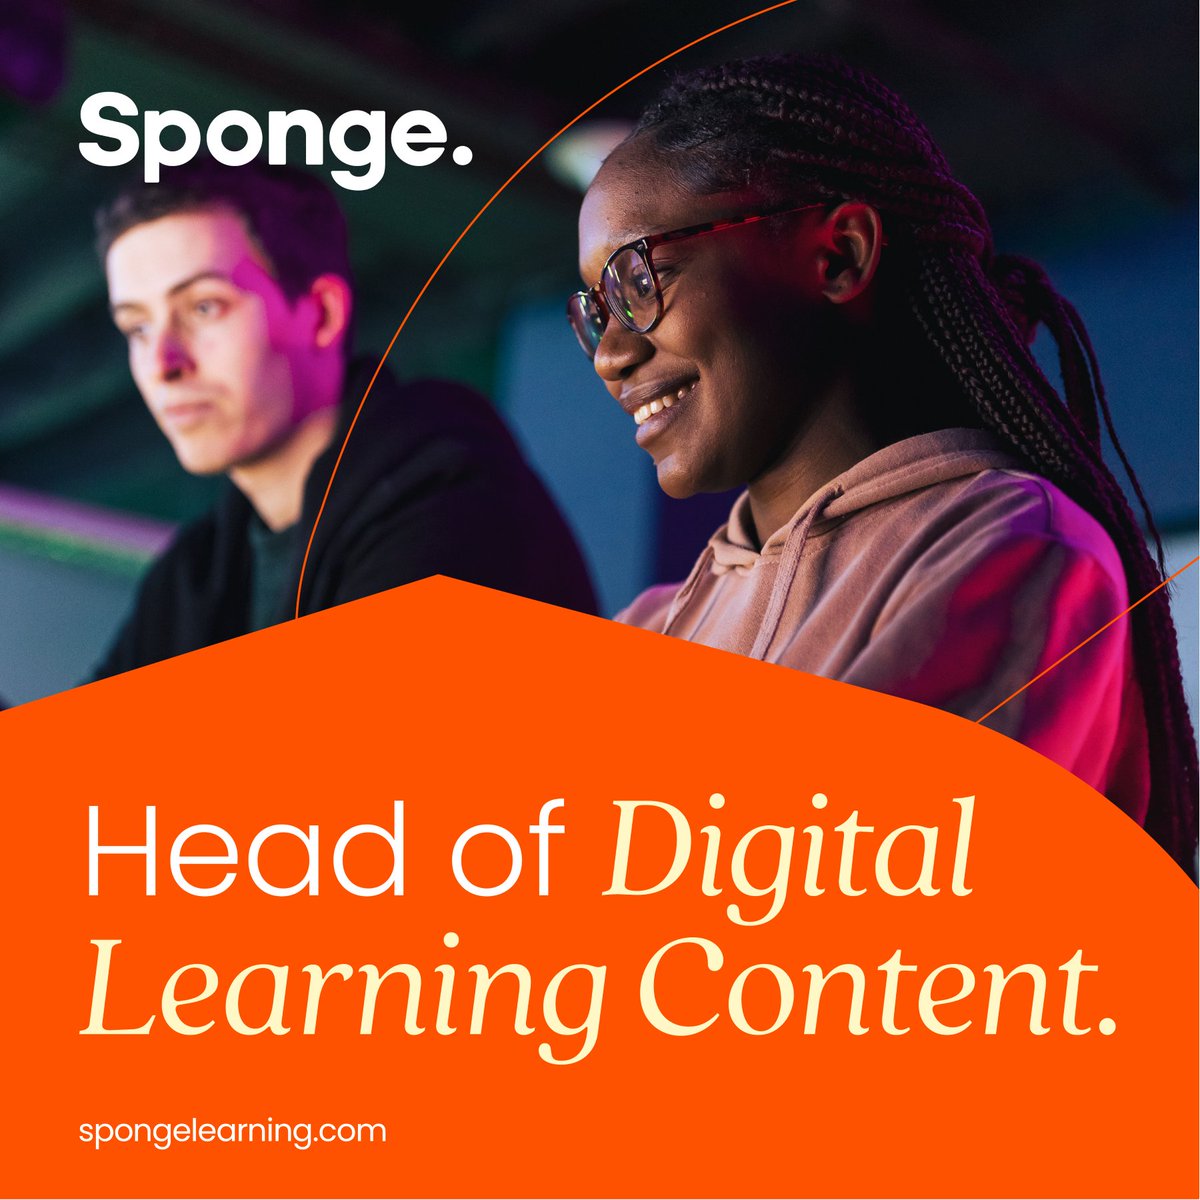 Are you clued up on cutting-edge learning content and love the idea of keeping a content library at the top of its game? If yes, you may be the perfect fit for our Head of Digital Learning Content role. Learn more here: hubs.li/Q02myKFn0